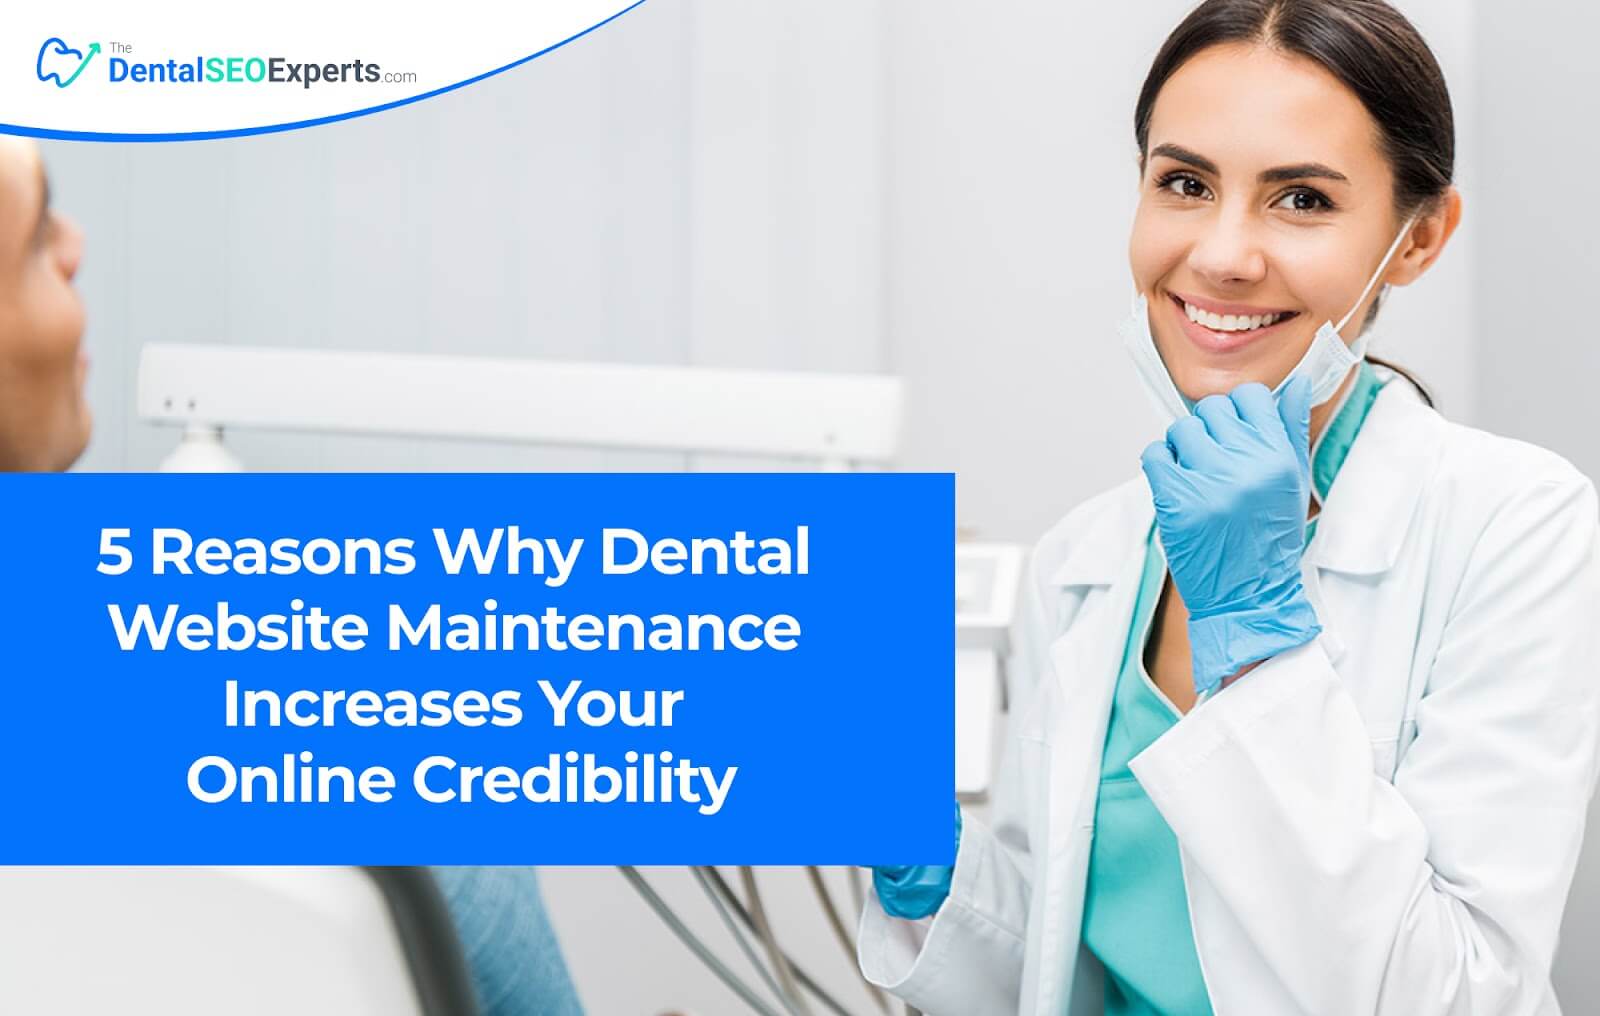 5 Reasons Why Dental Website Maintenance Increases Your Online Credibility (1)